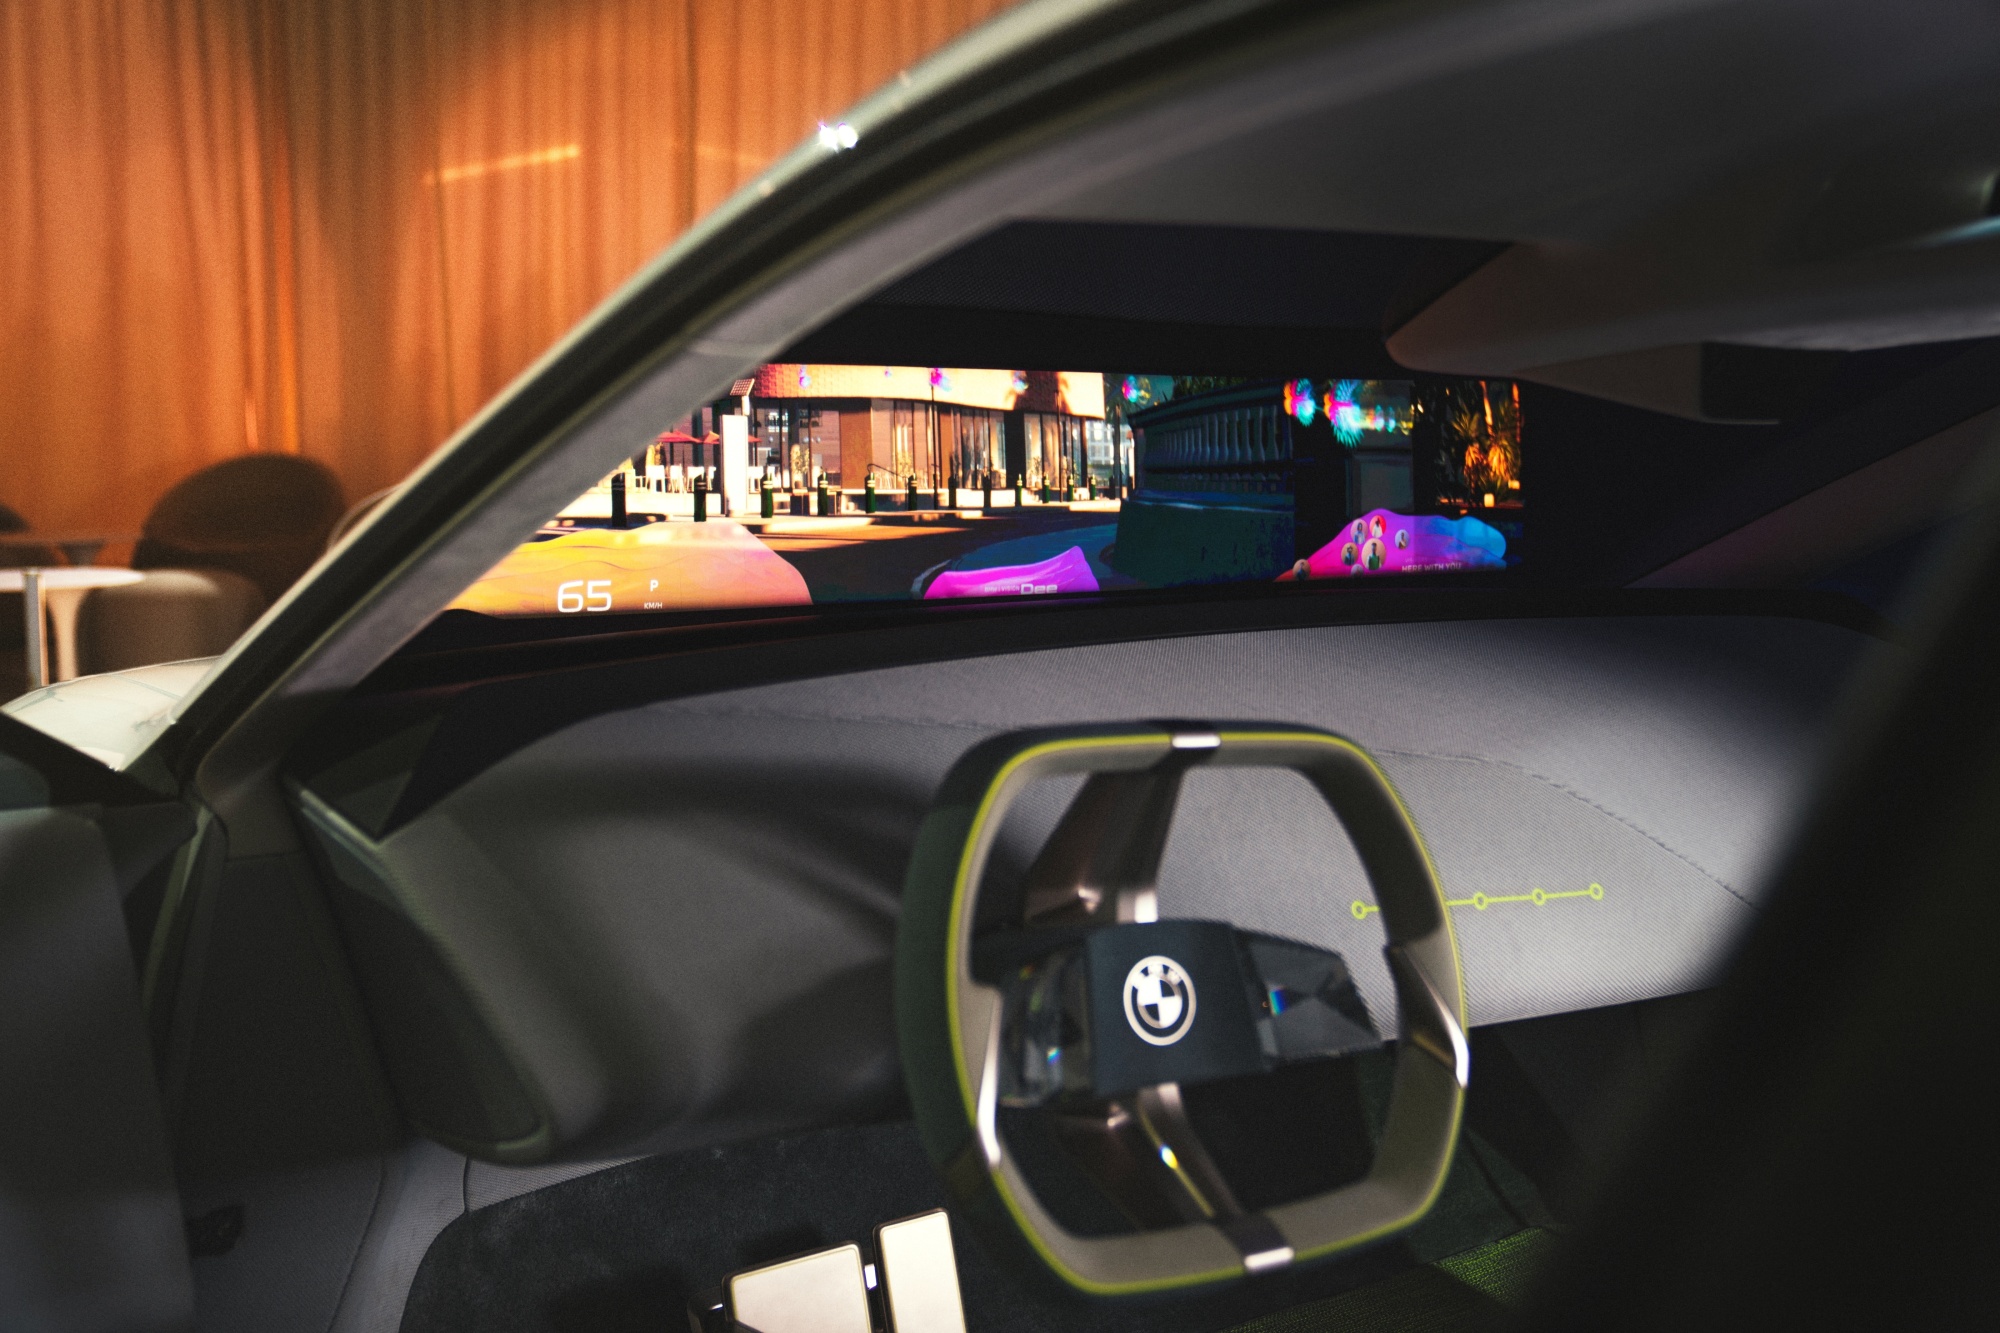 relates to BMW Takes Cues From Apple With Radical Interior Overhaul